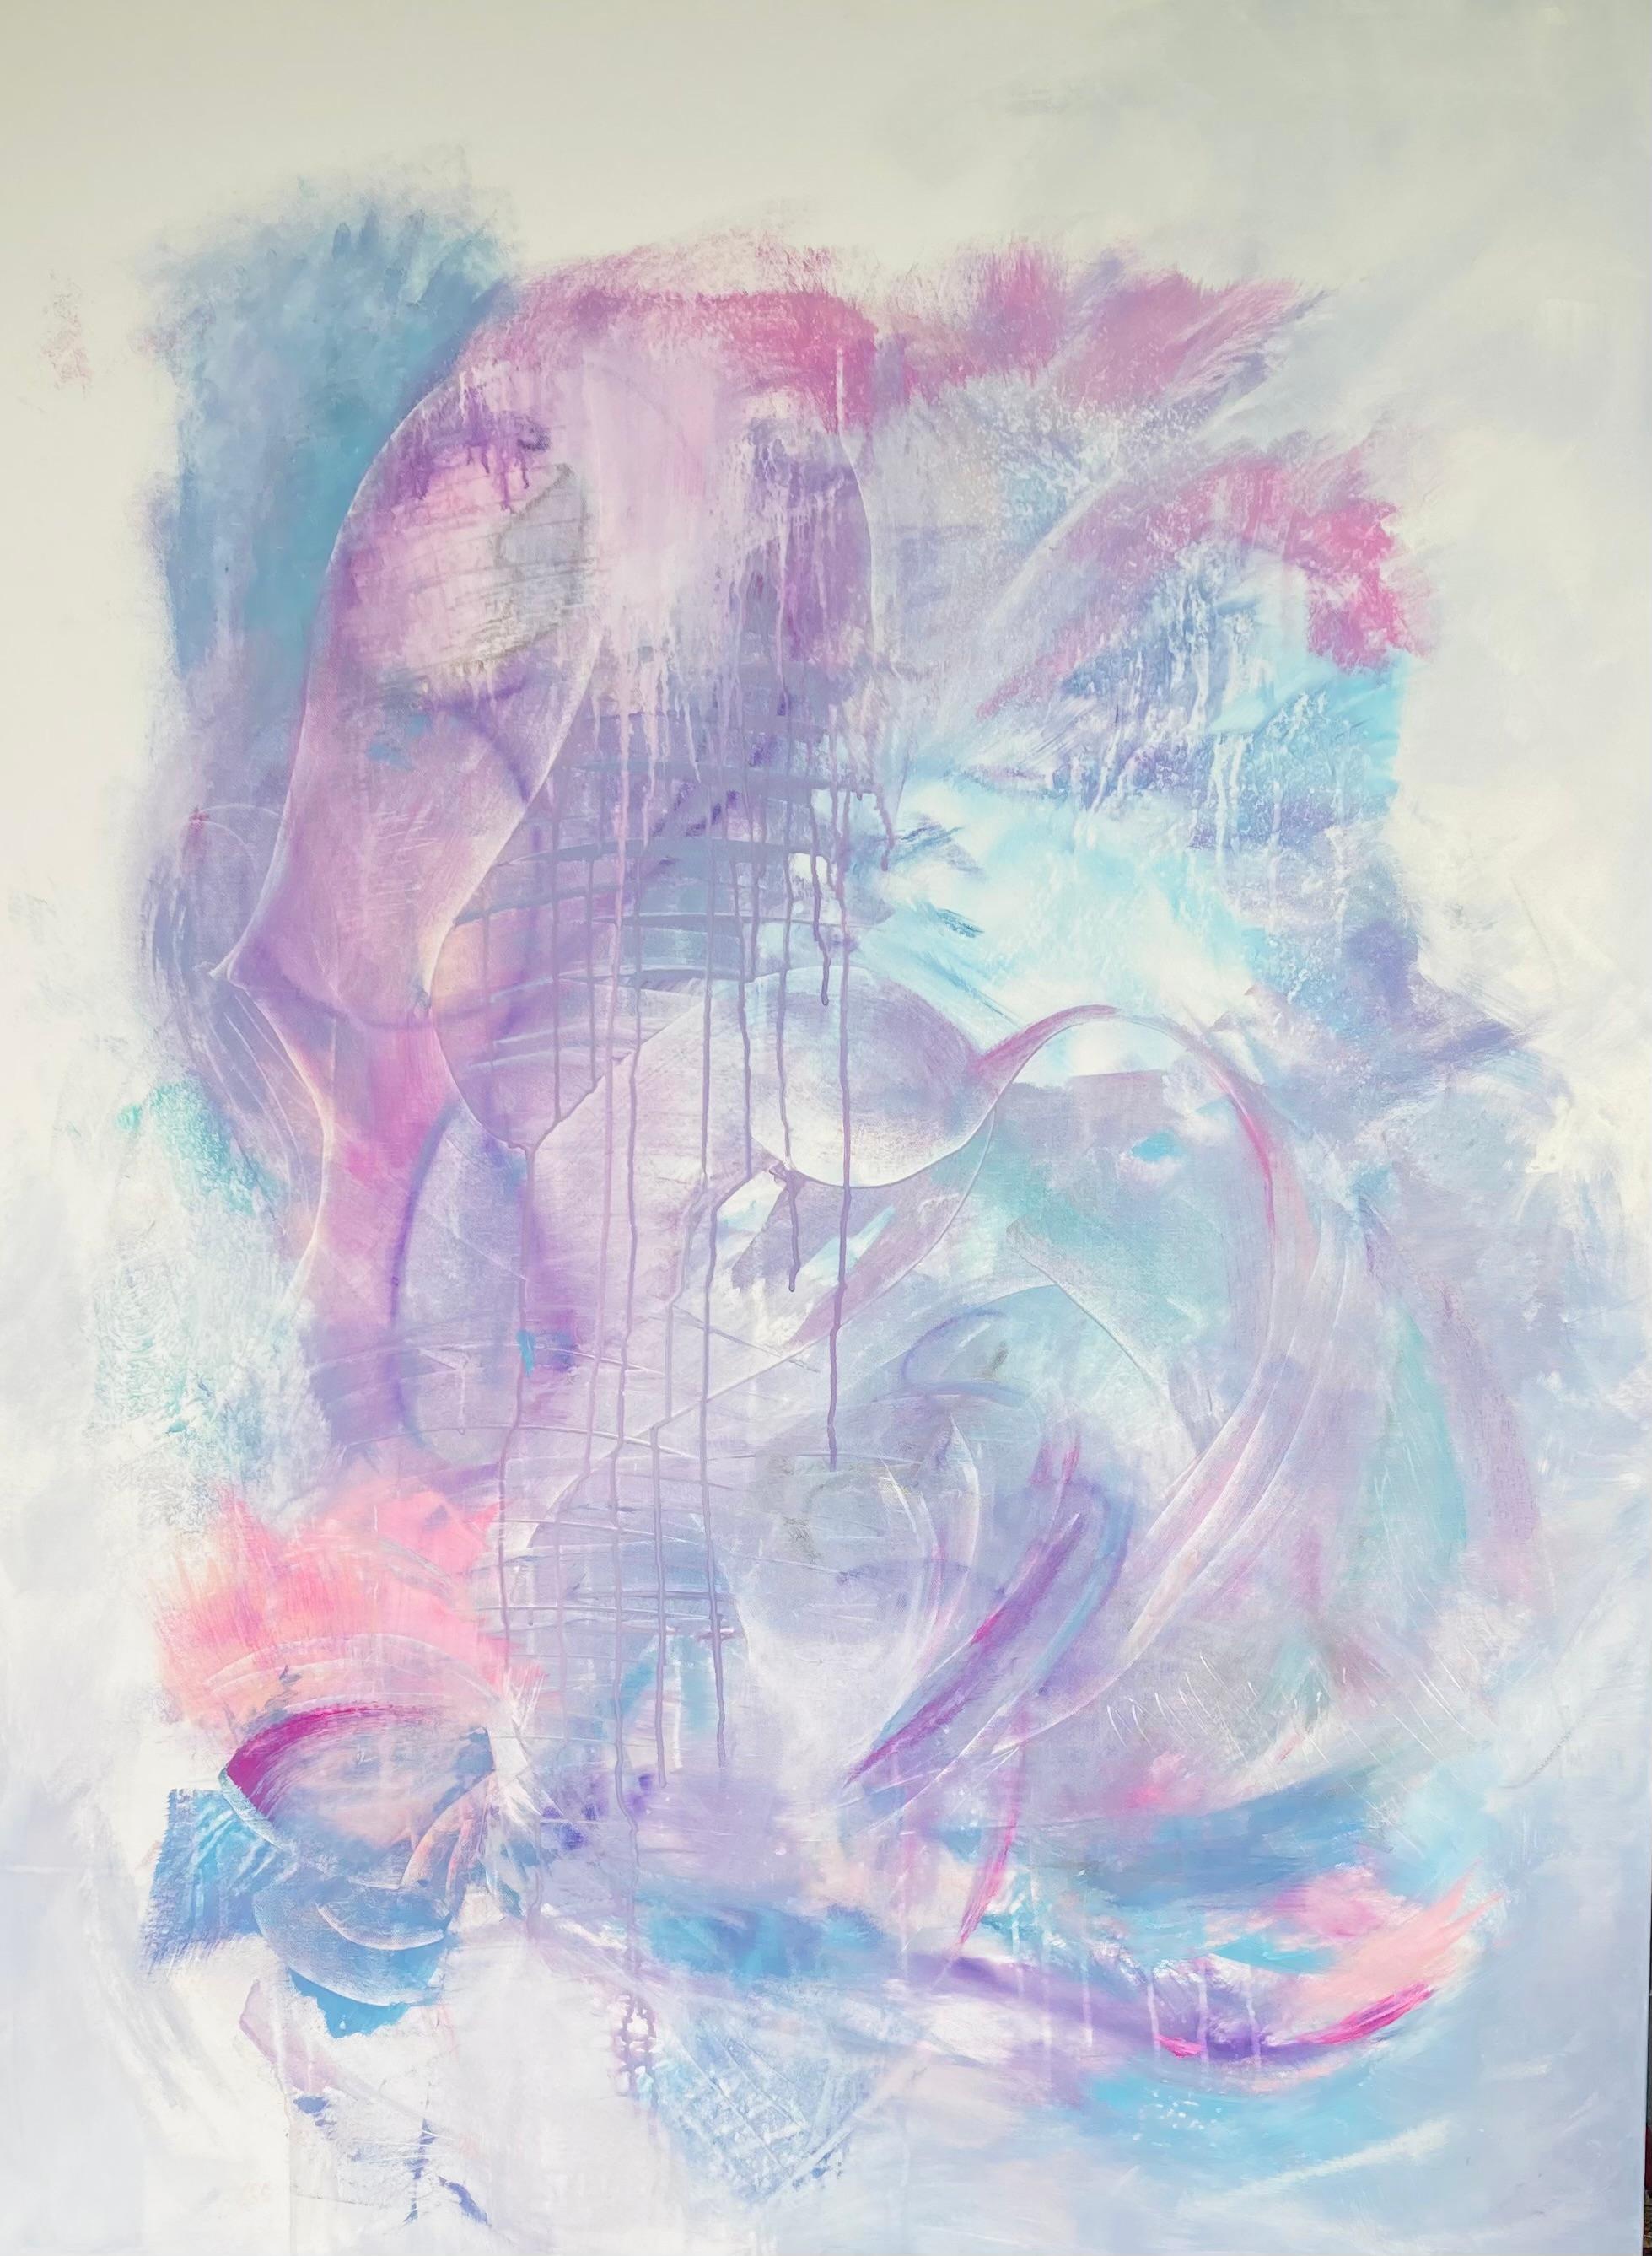 Les Taylor is an artist who has embraced a lifelong love for both music and art. In the sanctuary of her studio, always accompanied by a melodic backdrop, she finds true inspiration.

It is here that her artistic process comes to life as a lyrical